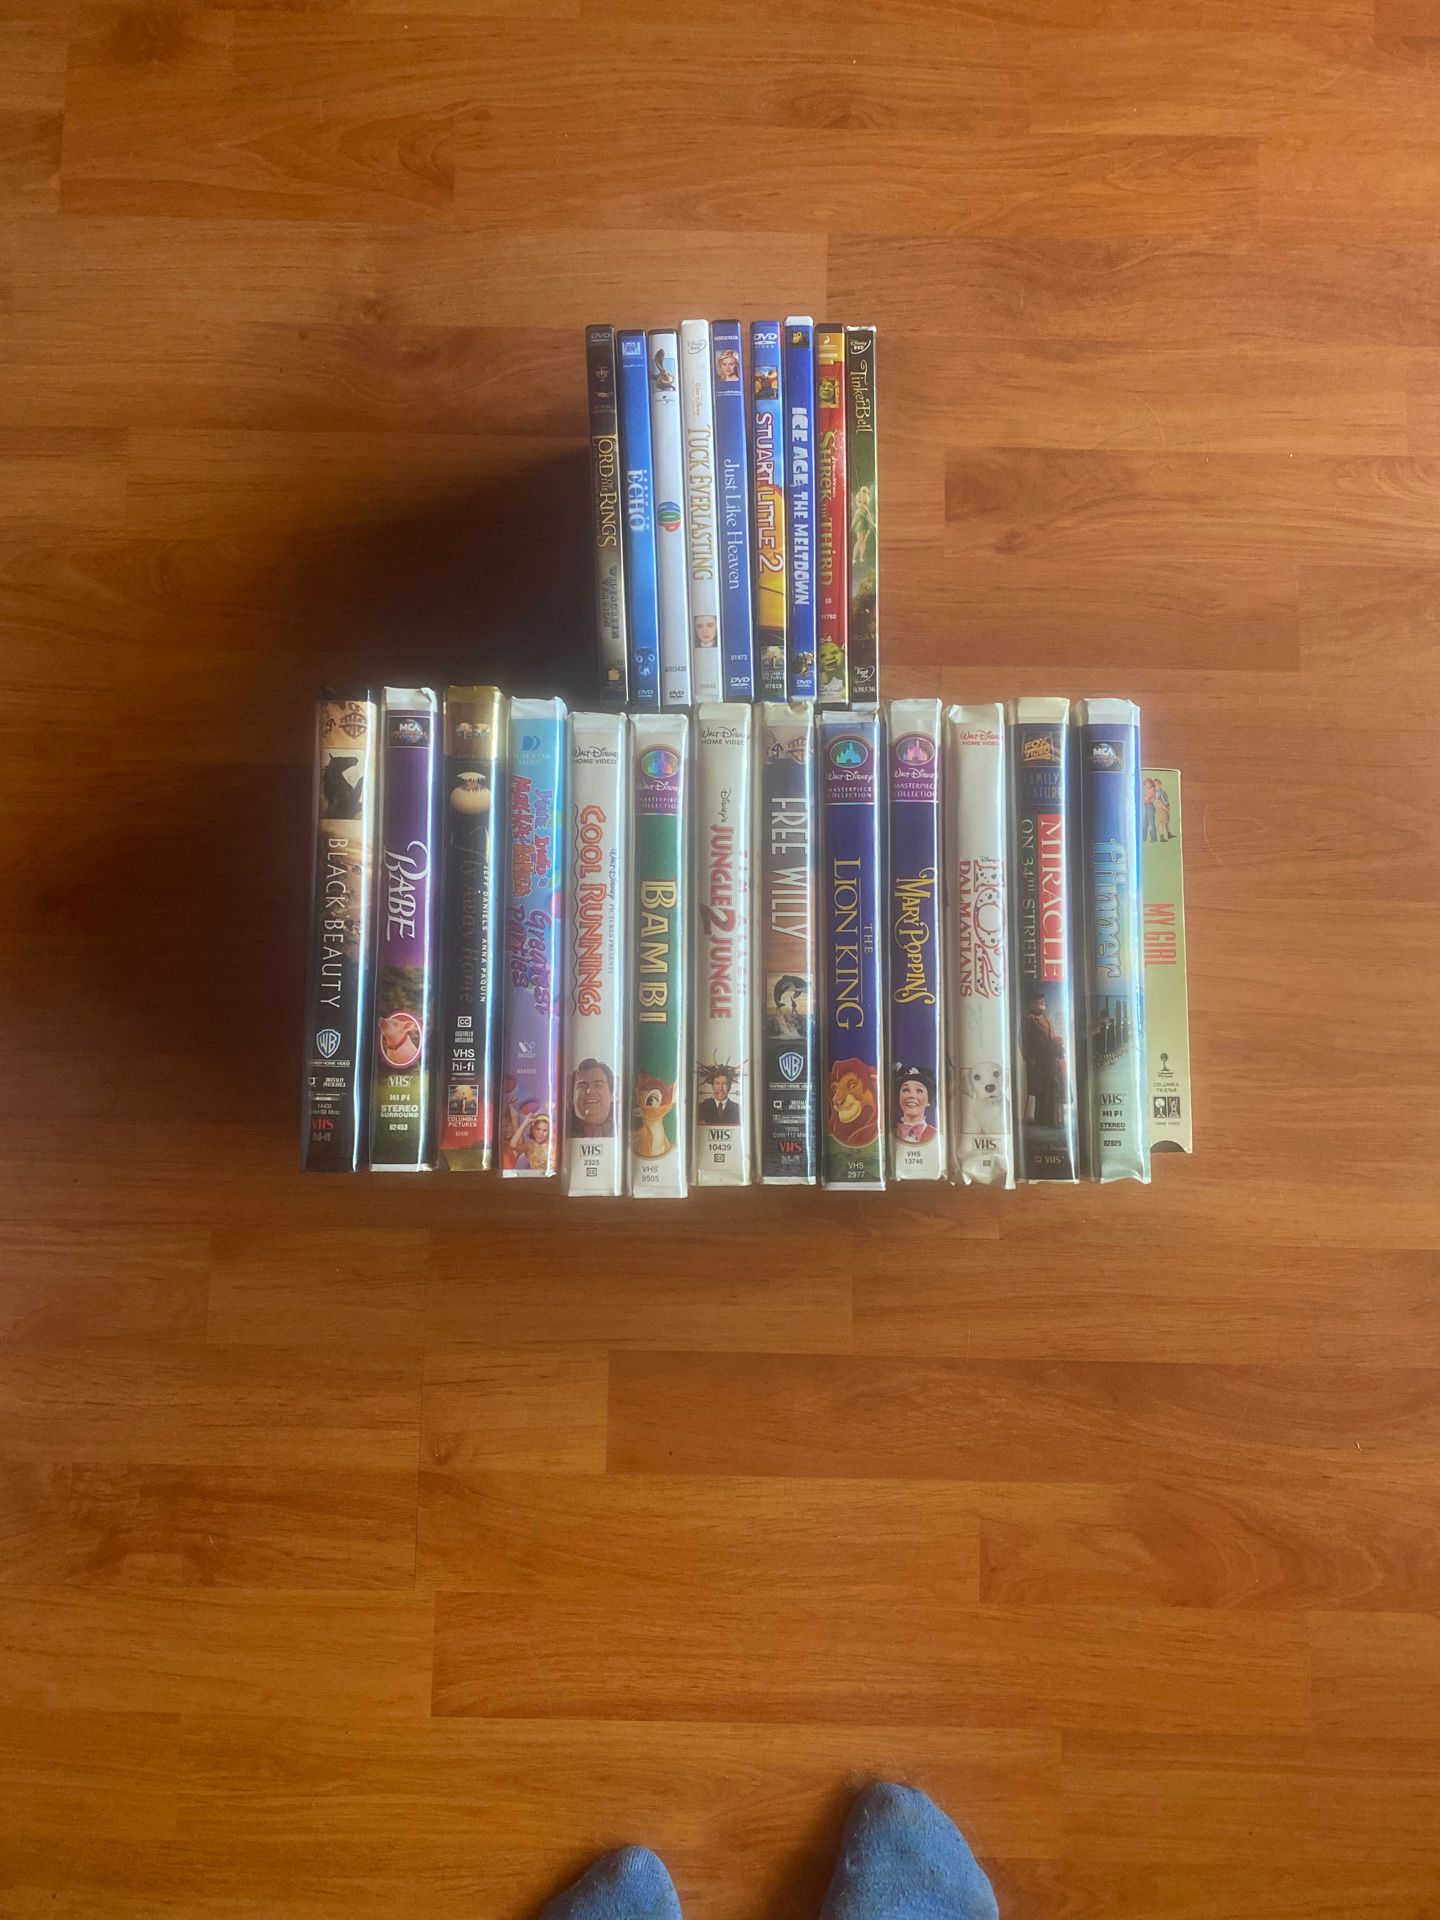 VHS and DVD’s